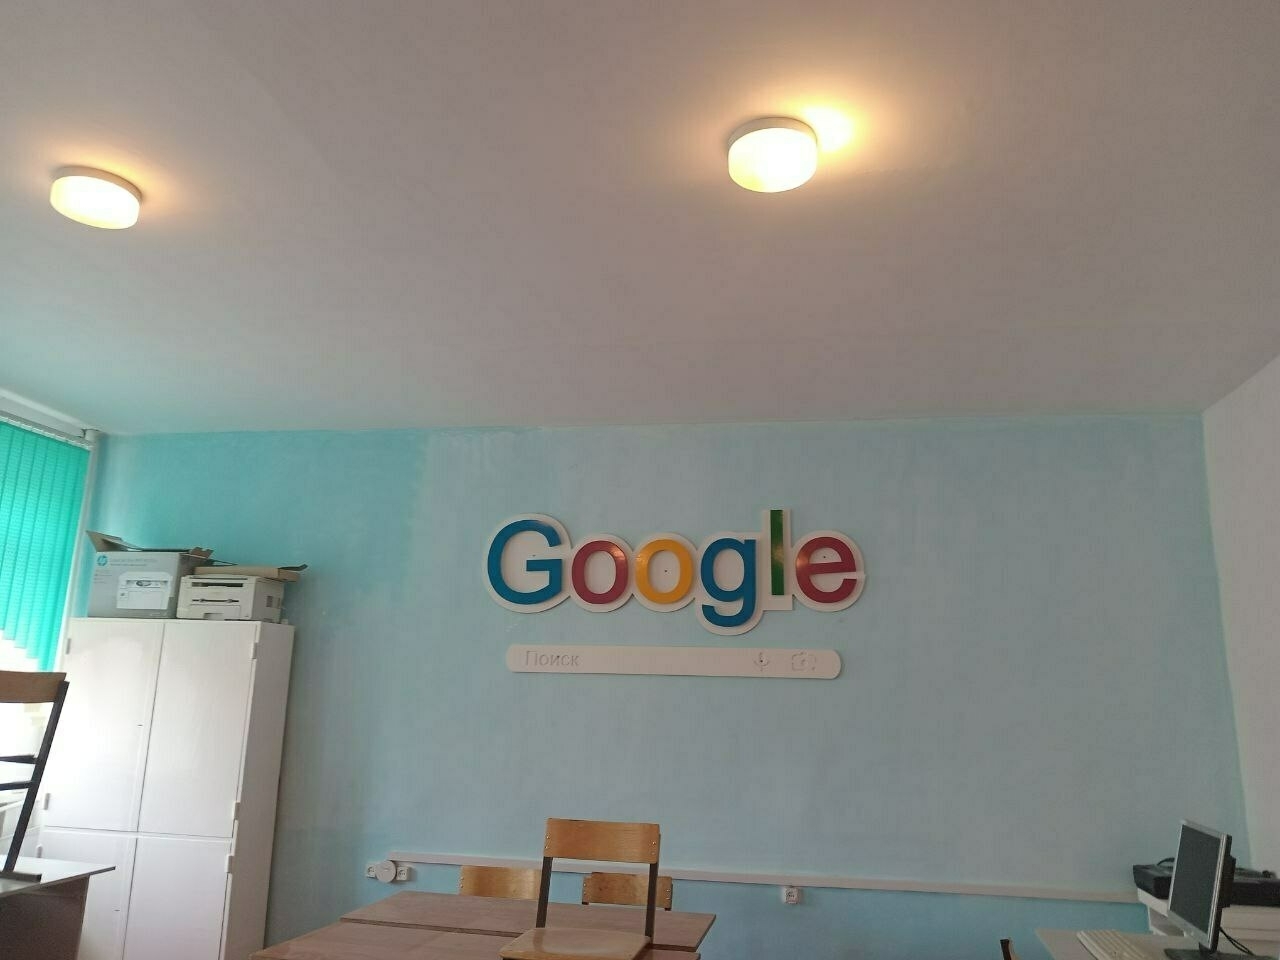 in a computer lab with a "Google" logo and search bar wall decoration